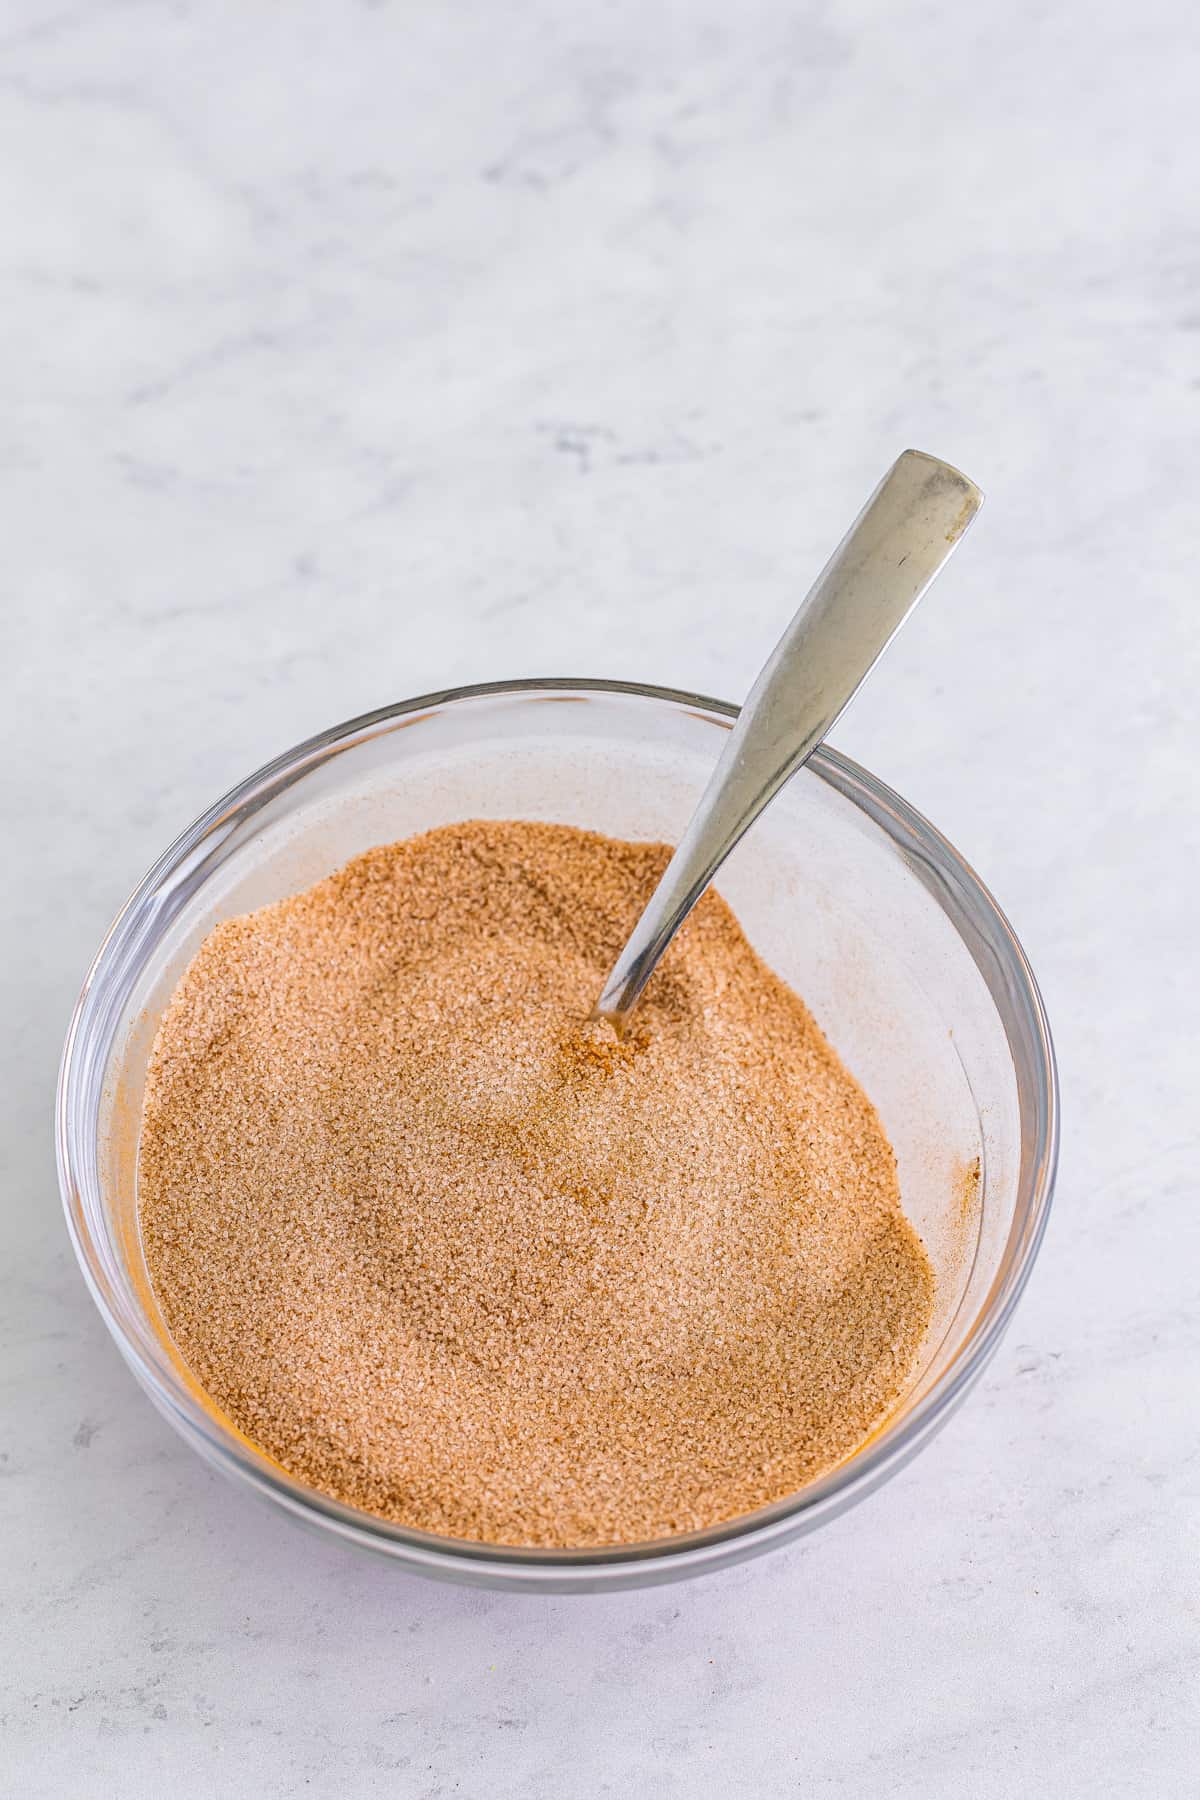 Cinnamon sugar in mixing bowl with spoon.